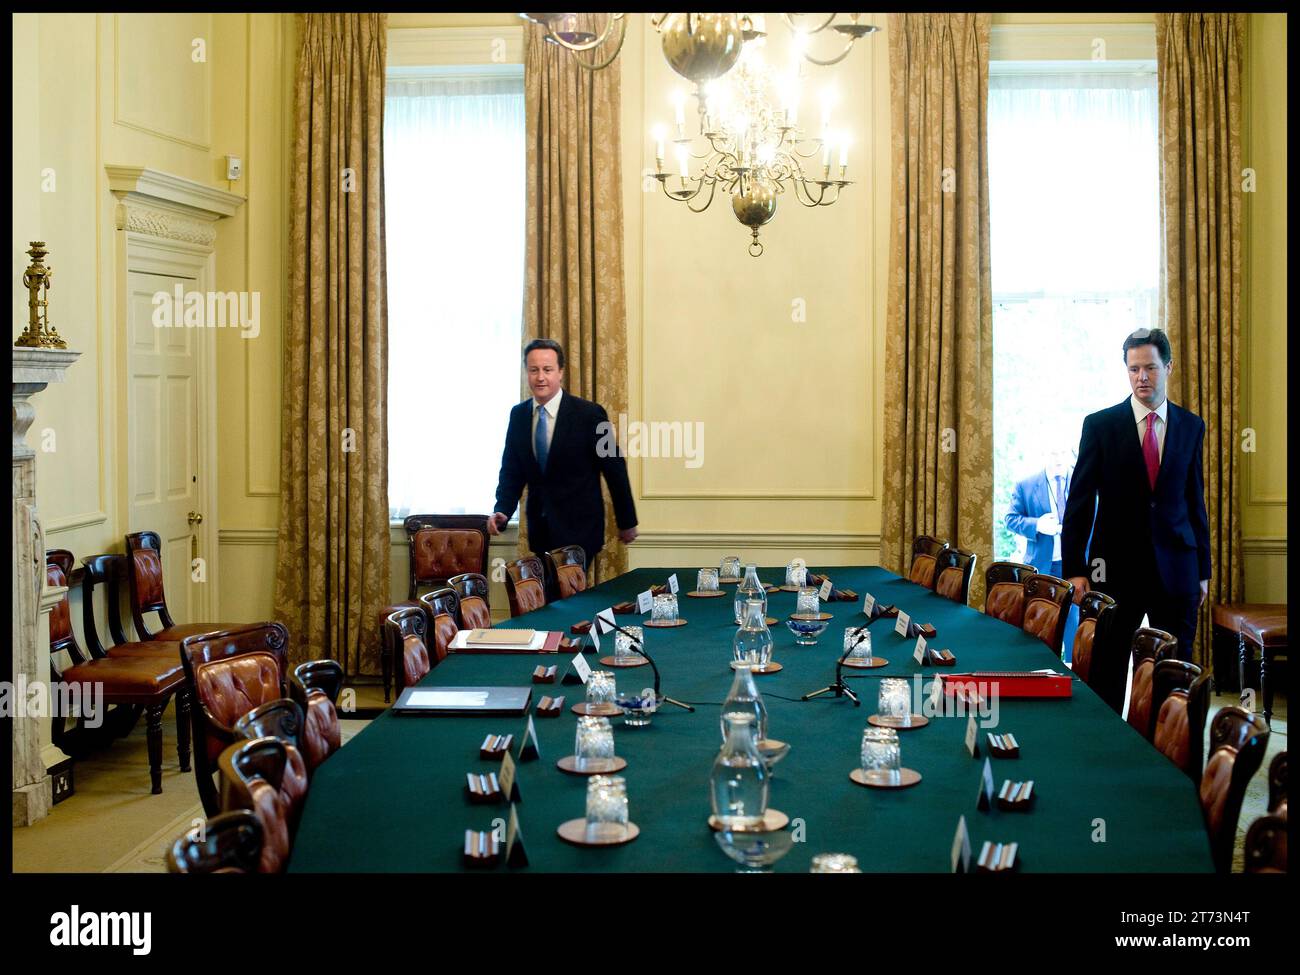 London, UK. 18th May, 2010. Image © Licensed to Parsons Media. 13/11/2023. London, United Kingdom. David Cameron appointed Foreign Secretary. The Prime Minister David Cameron and The Deputy Prime Minister Nick Clegg hold the Big Society meeting inside the Cabinet room in No10 Downing Street, Tuesday May 18, 2010. Photo Picture by Credit: andrew parsons/Alamy Live News Stock Photo